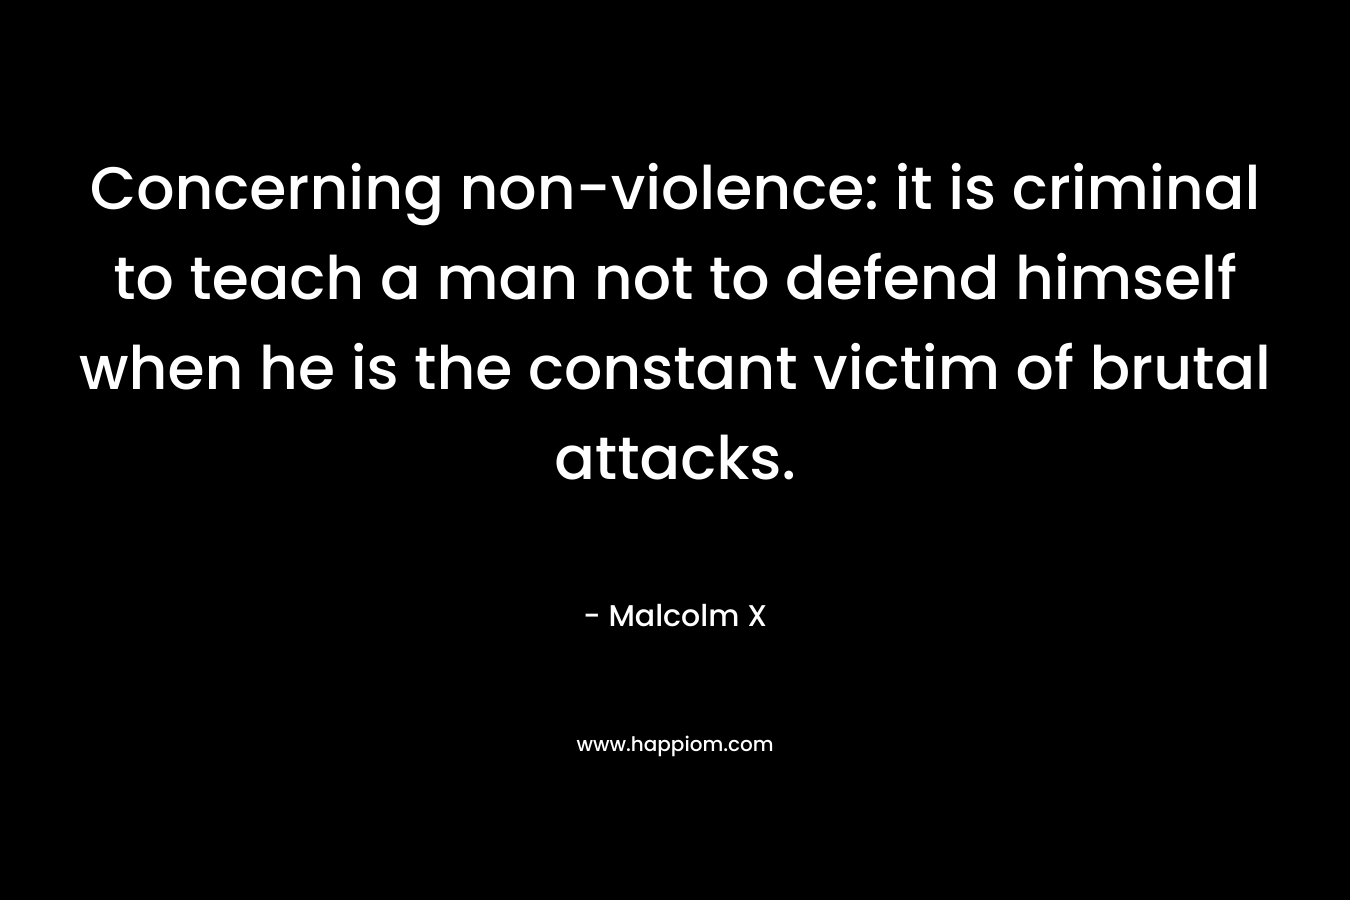 Concerning non-violence: it is criminal to teach a man not to defend himself when he is the constant victim of brutal attacks. – Malcolm X